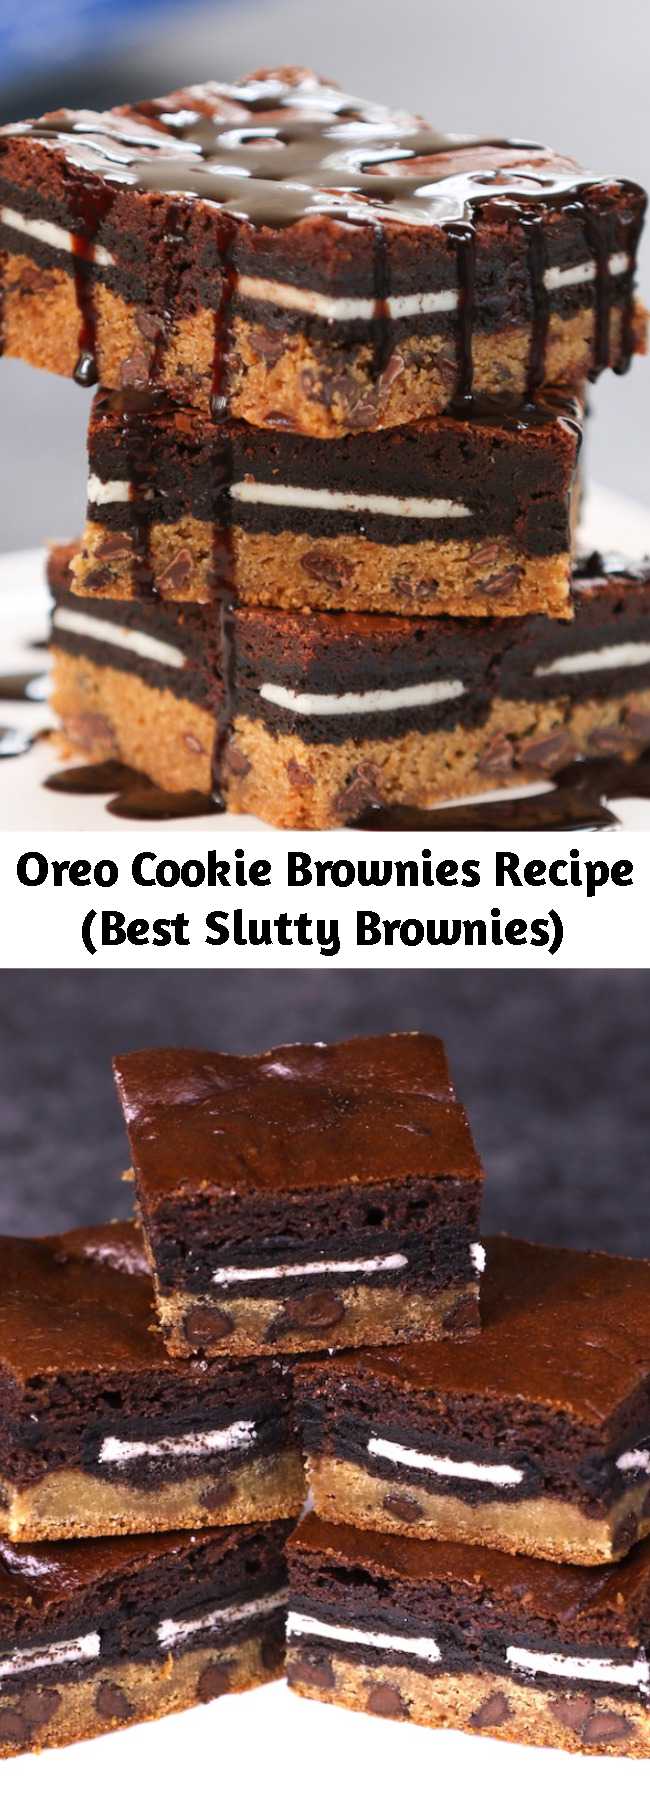 Oreo Cookie Brownies Recipe (Best Slutty Brownies) - These Slutty Brownies melt in your mouth with rich layers of cookie dough, Oreo cookies and brownies. This slutty brownie recipe is easy to make whenever you want an extra-decadent treat!